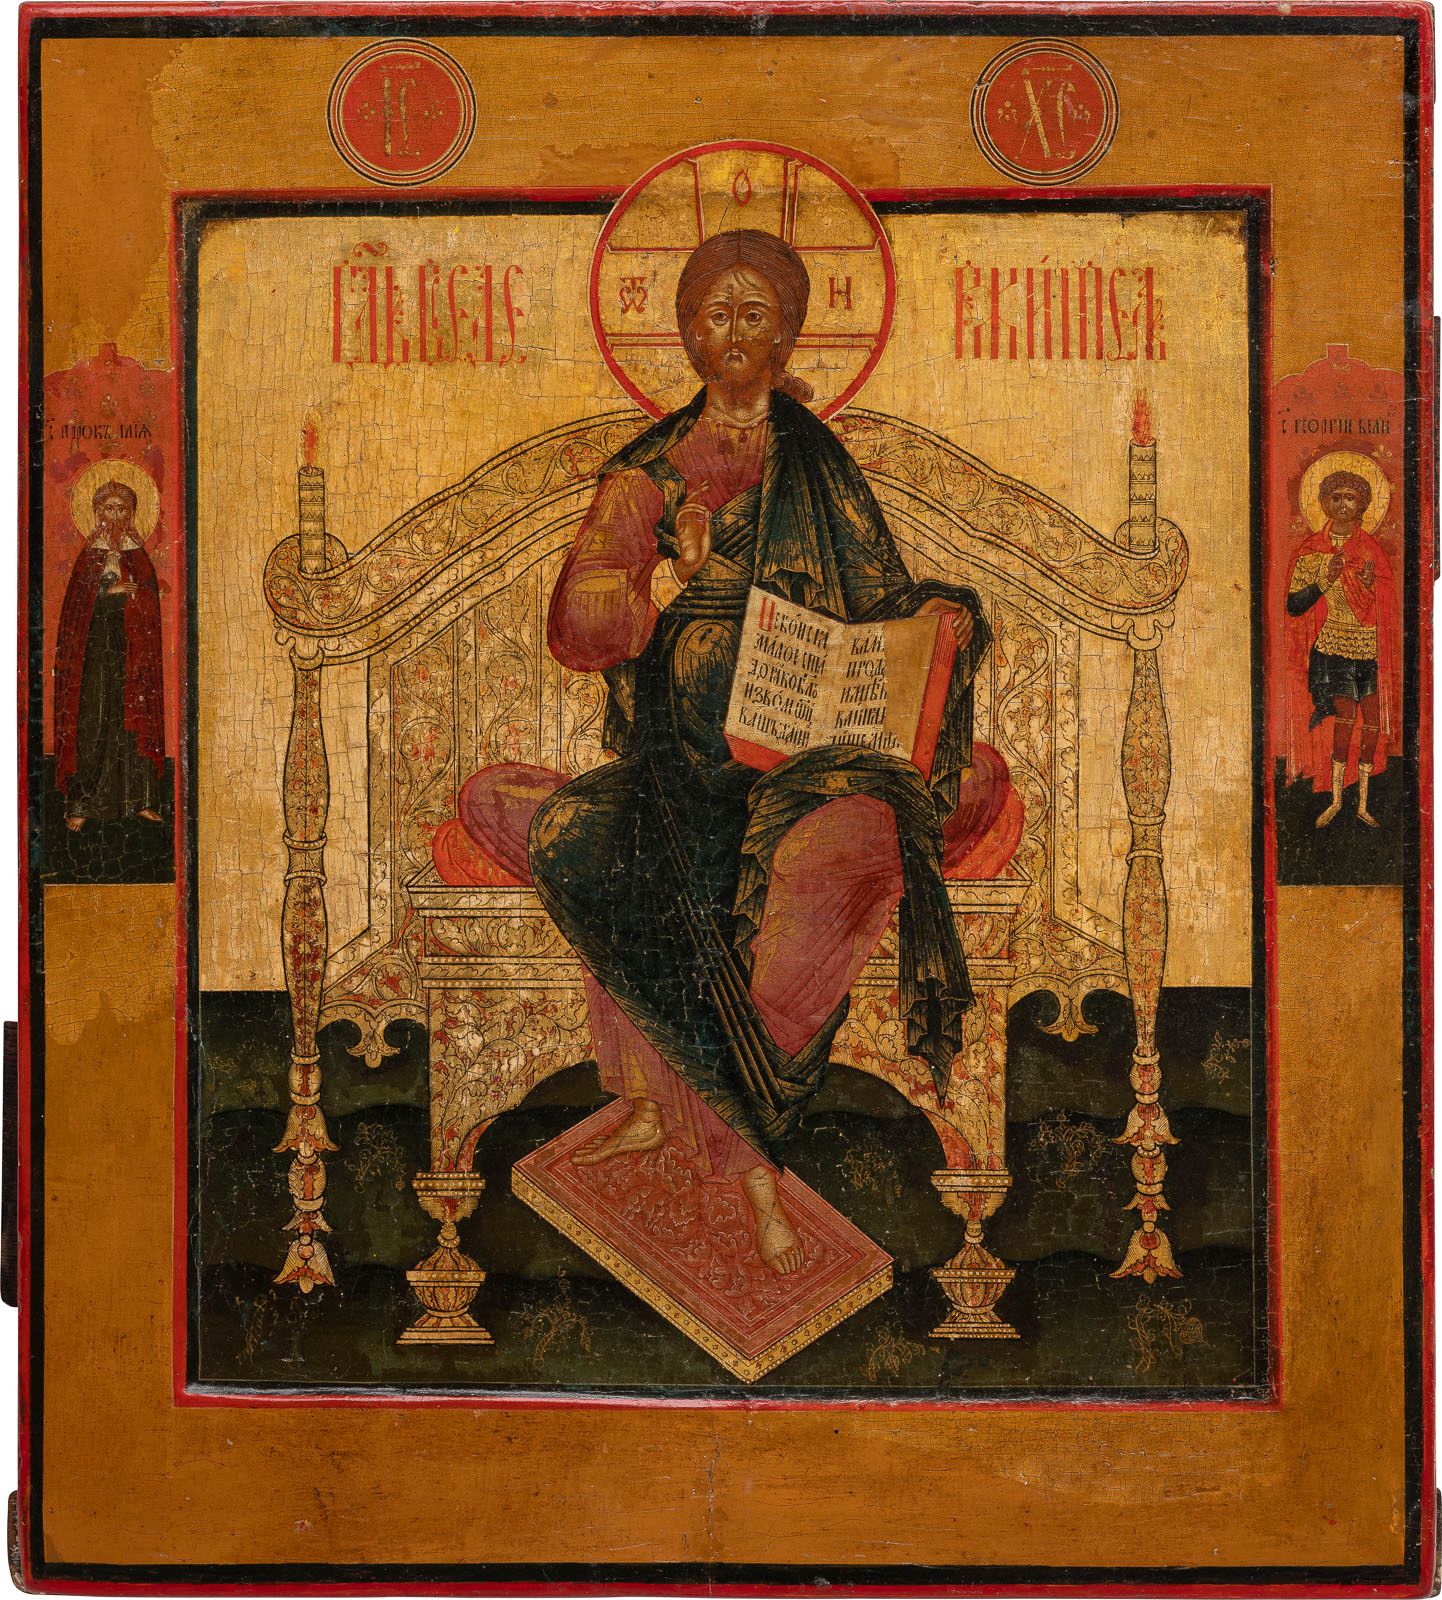 A FINE ICON SHOWING THE ENTHRONED CHRIST A FINE ICON SHOWING THE ENTHRONED CHRIS&hellip;